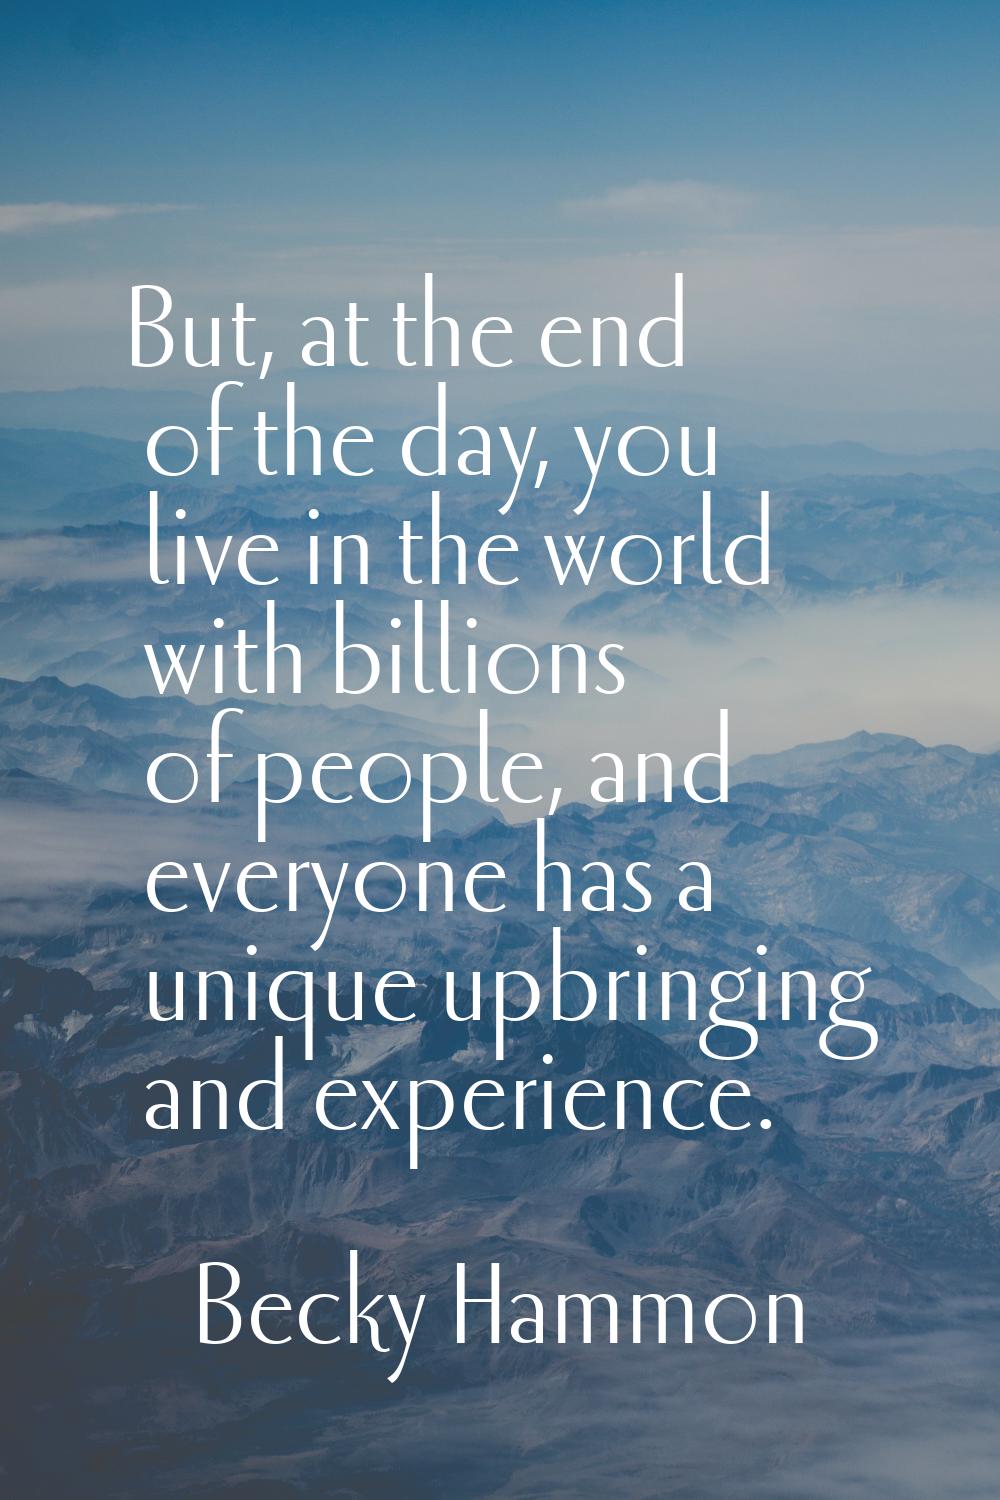 But, at the end of the day, you live in the world with billions of people, and everyone has a uniqu